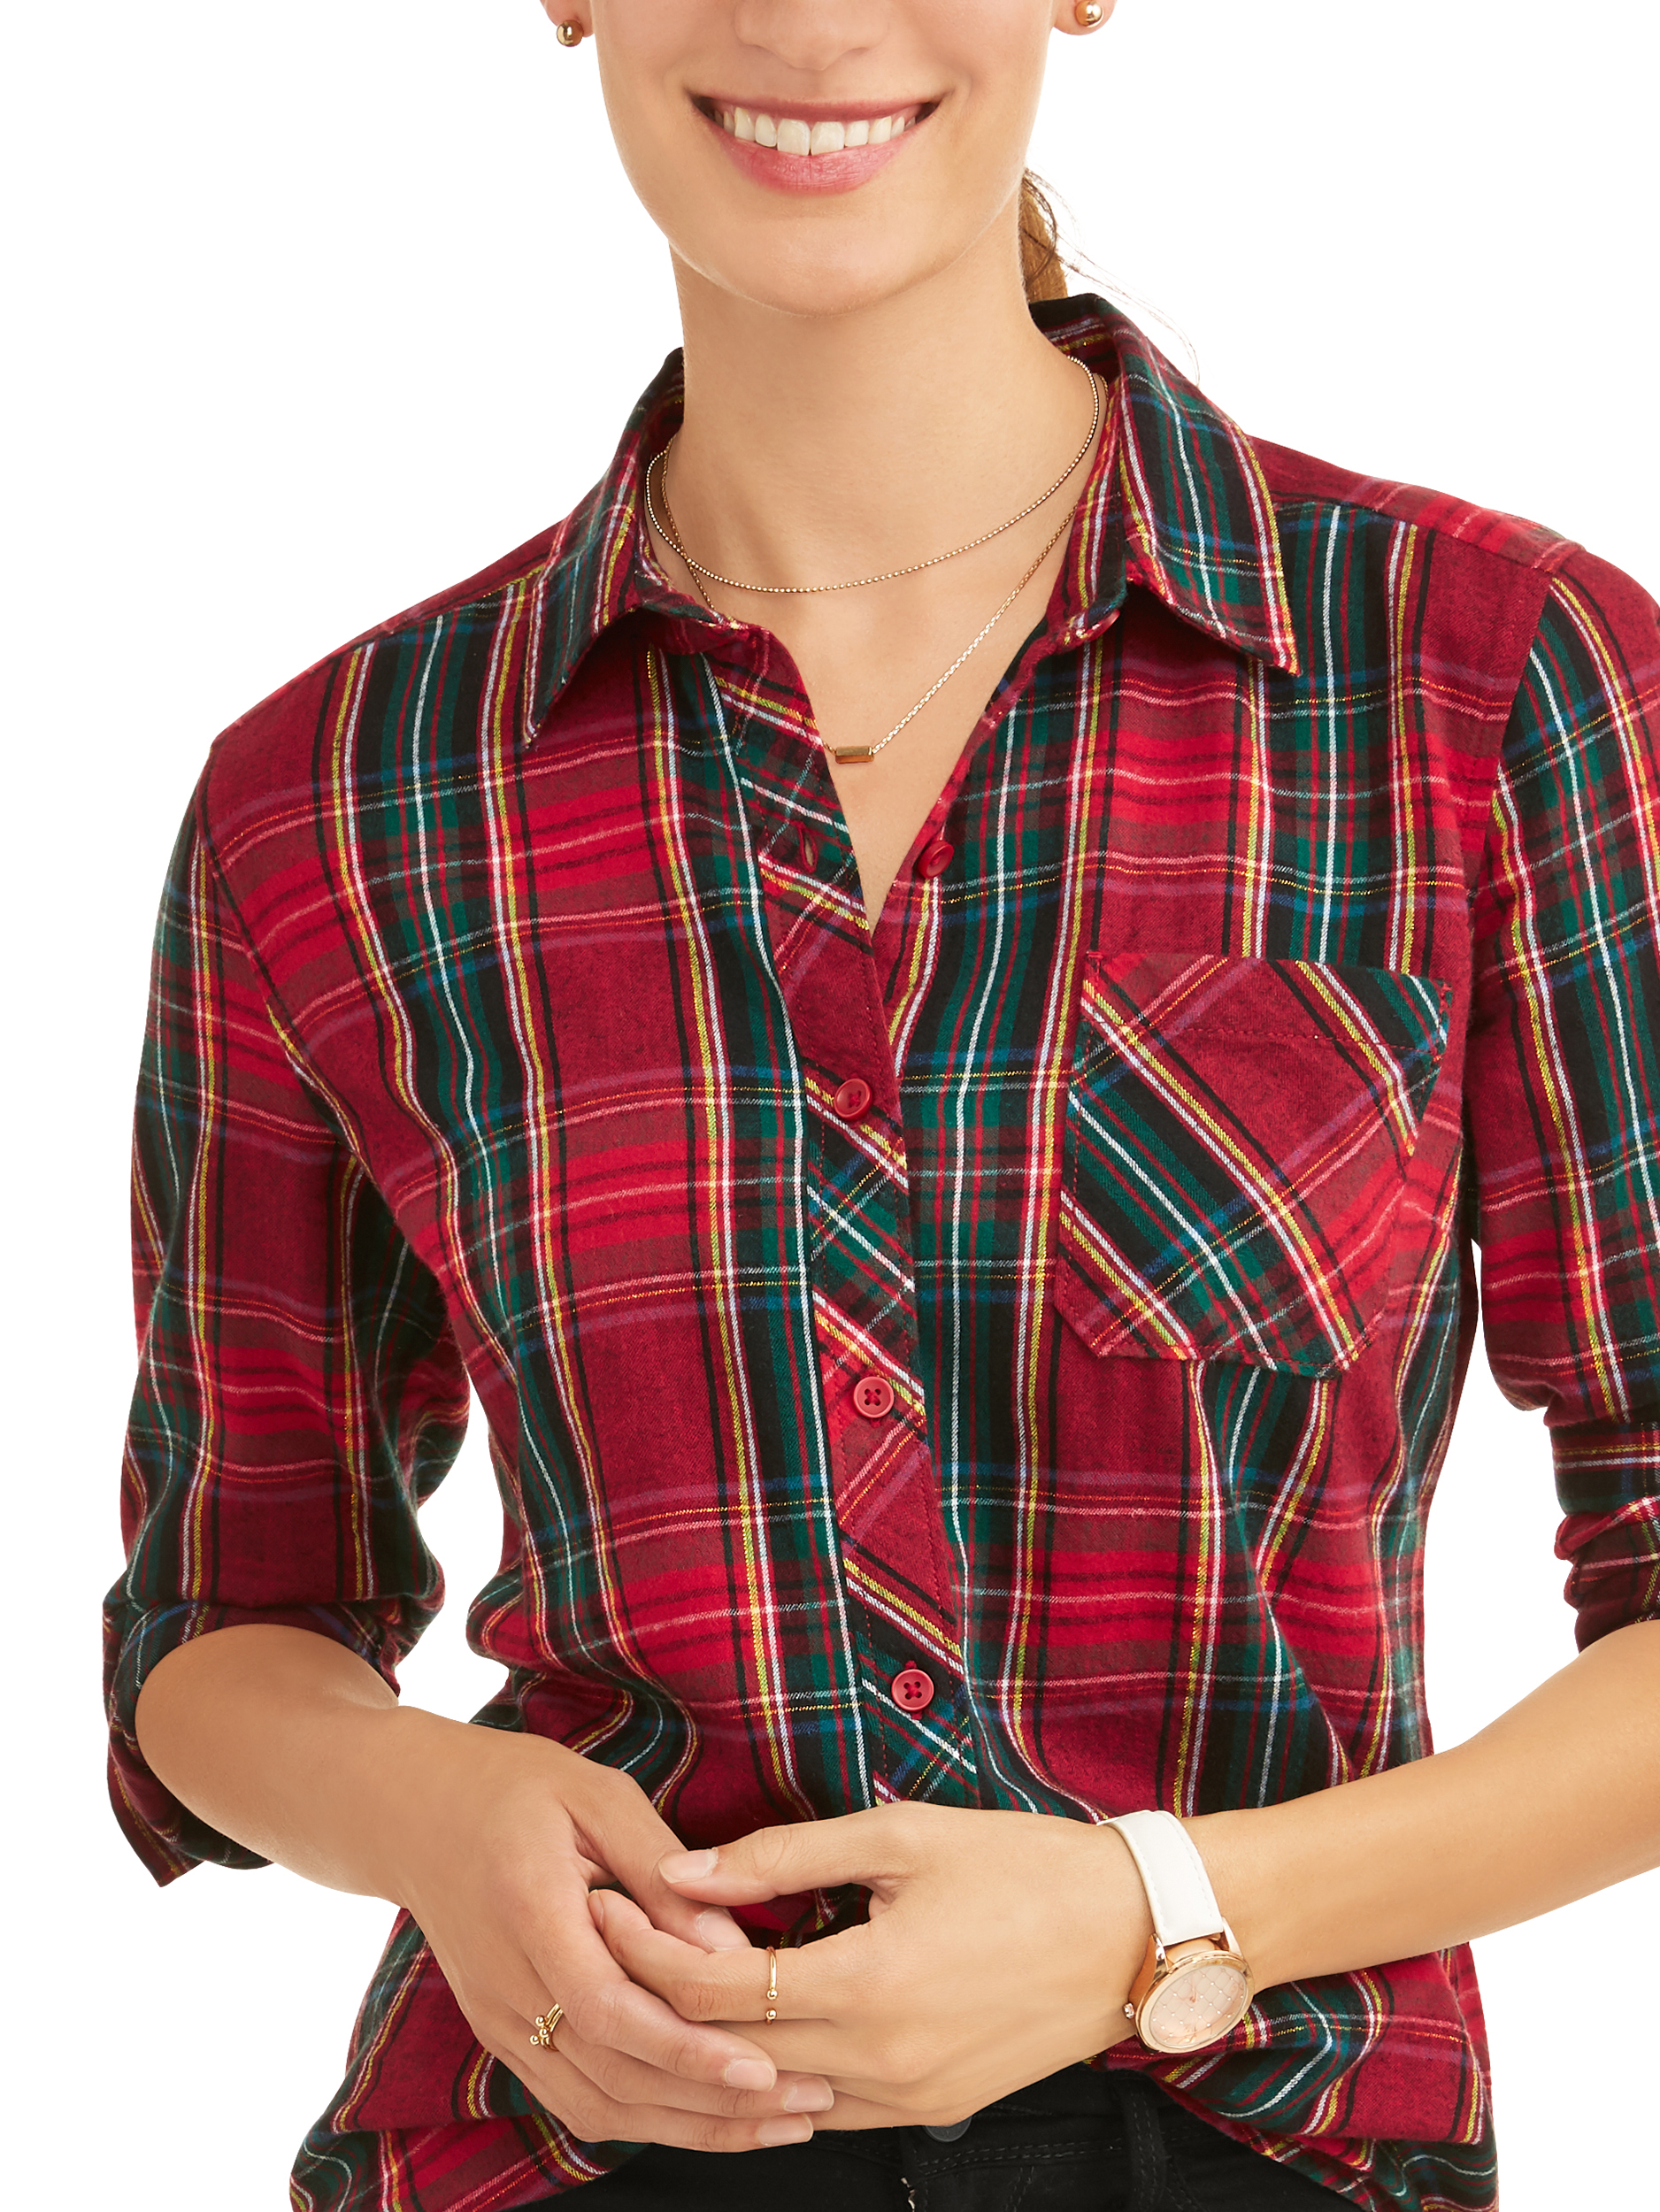 Time and Tru Women's Brushed Cotton Plaid Shirt - image 4 of 6